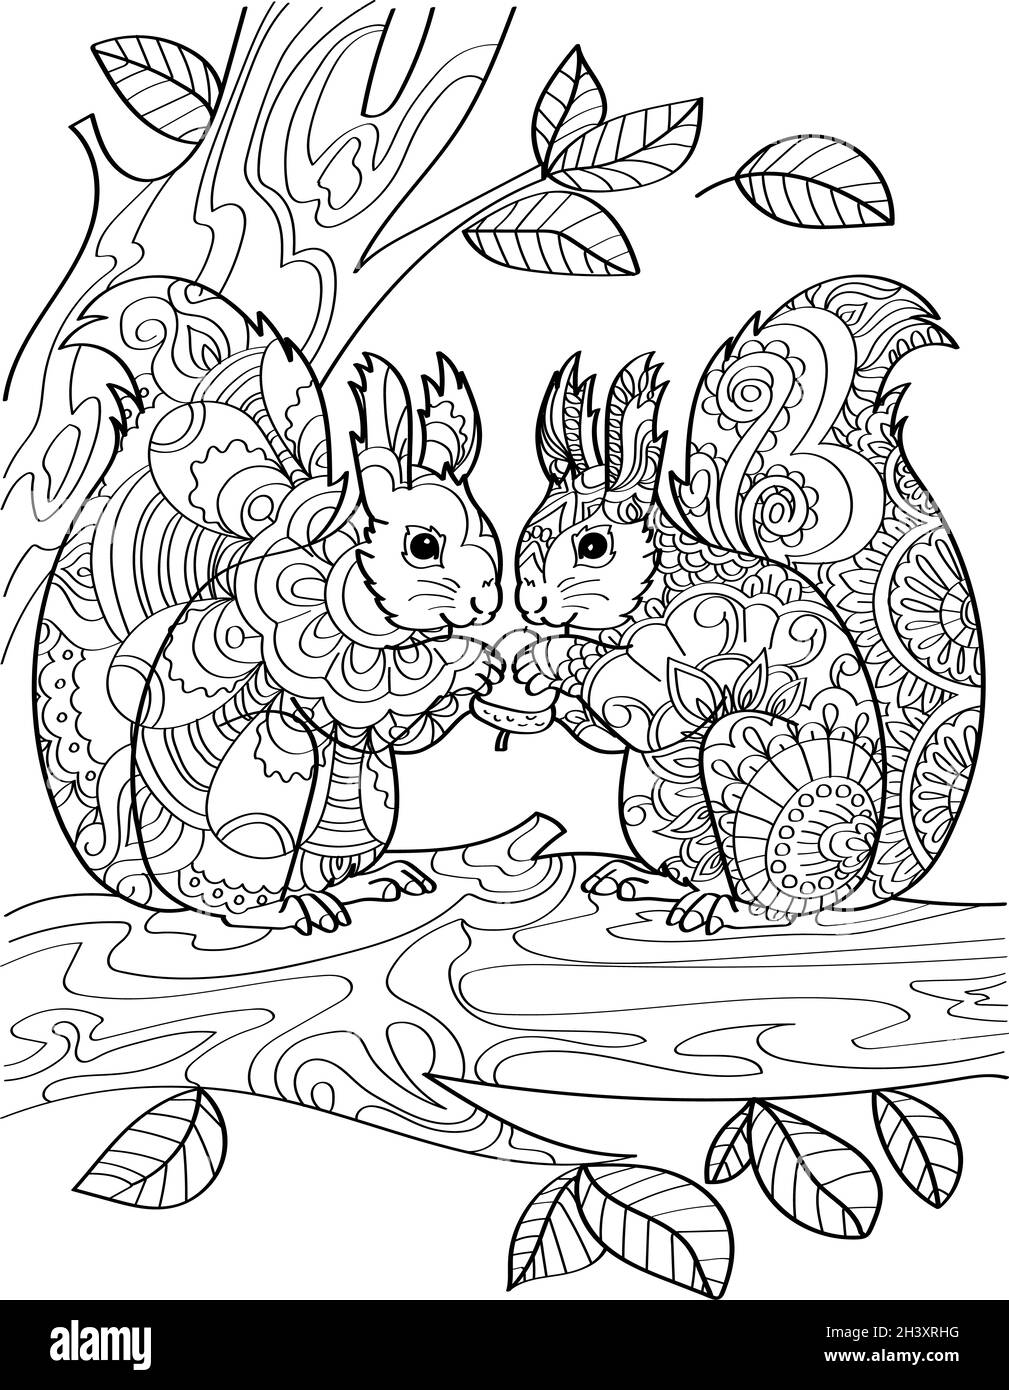 Two Squirrels Standing Holding Acorn On Top Tree Branch With Leaves Line Drawing. Chipmunks Facing Each Other Eating Nut On Fore Stock Photo